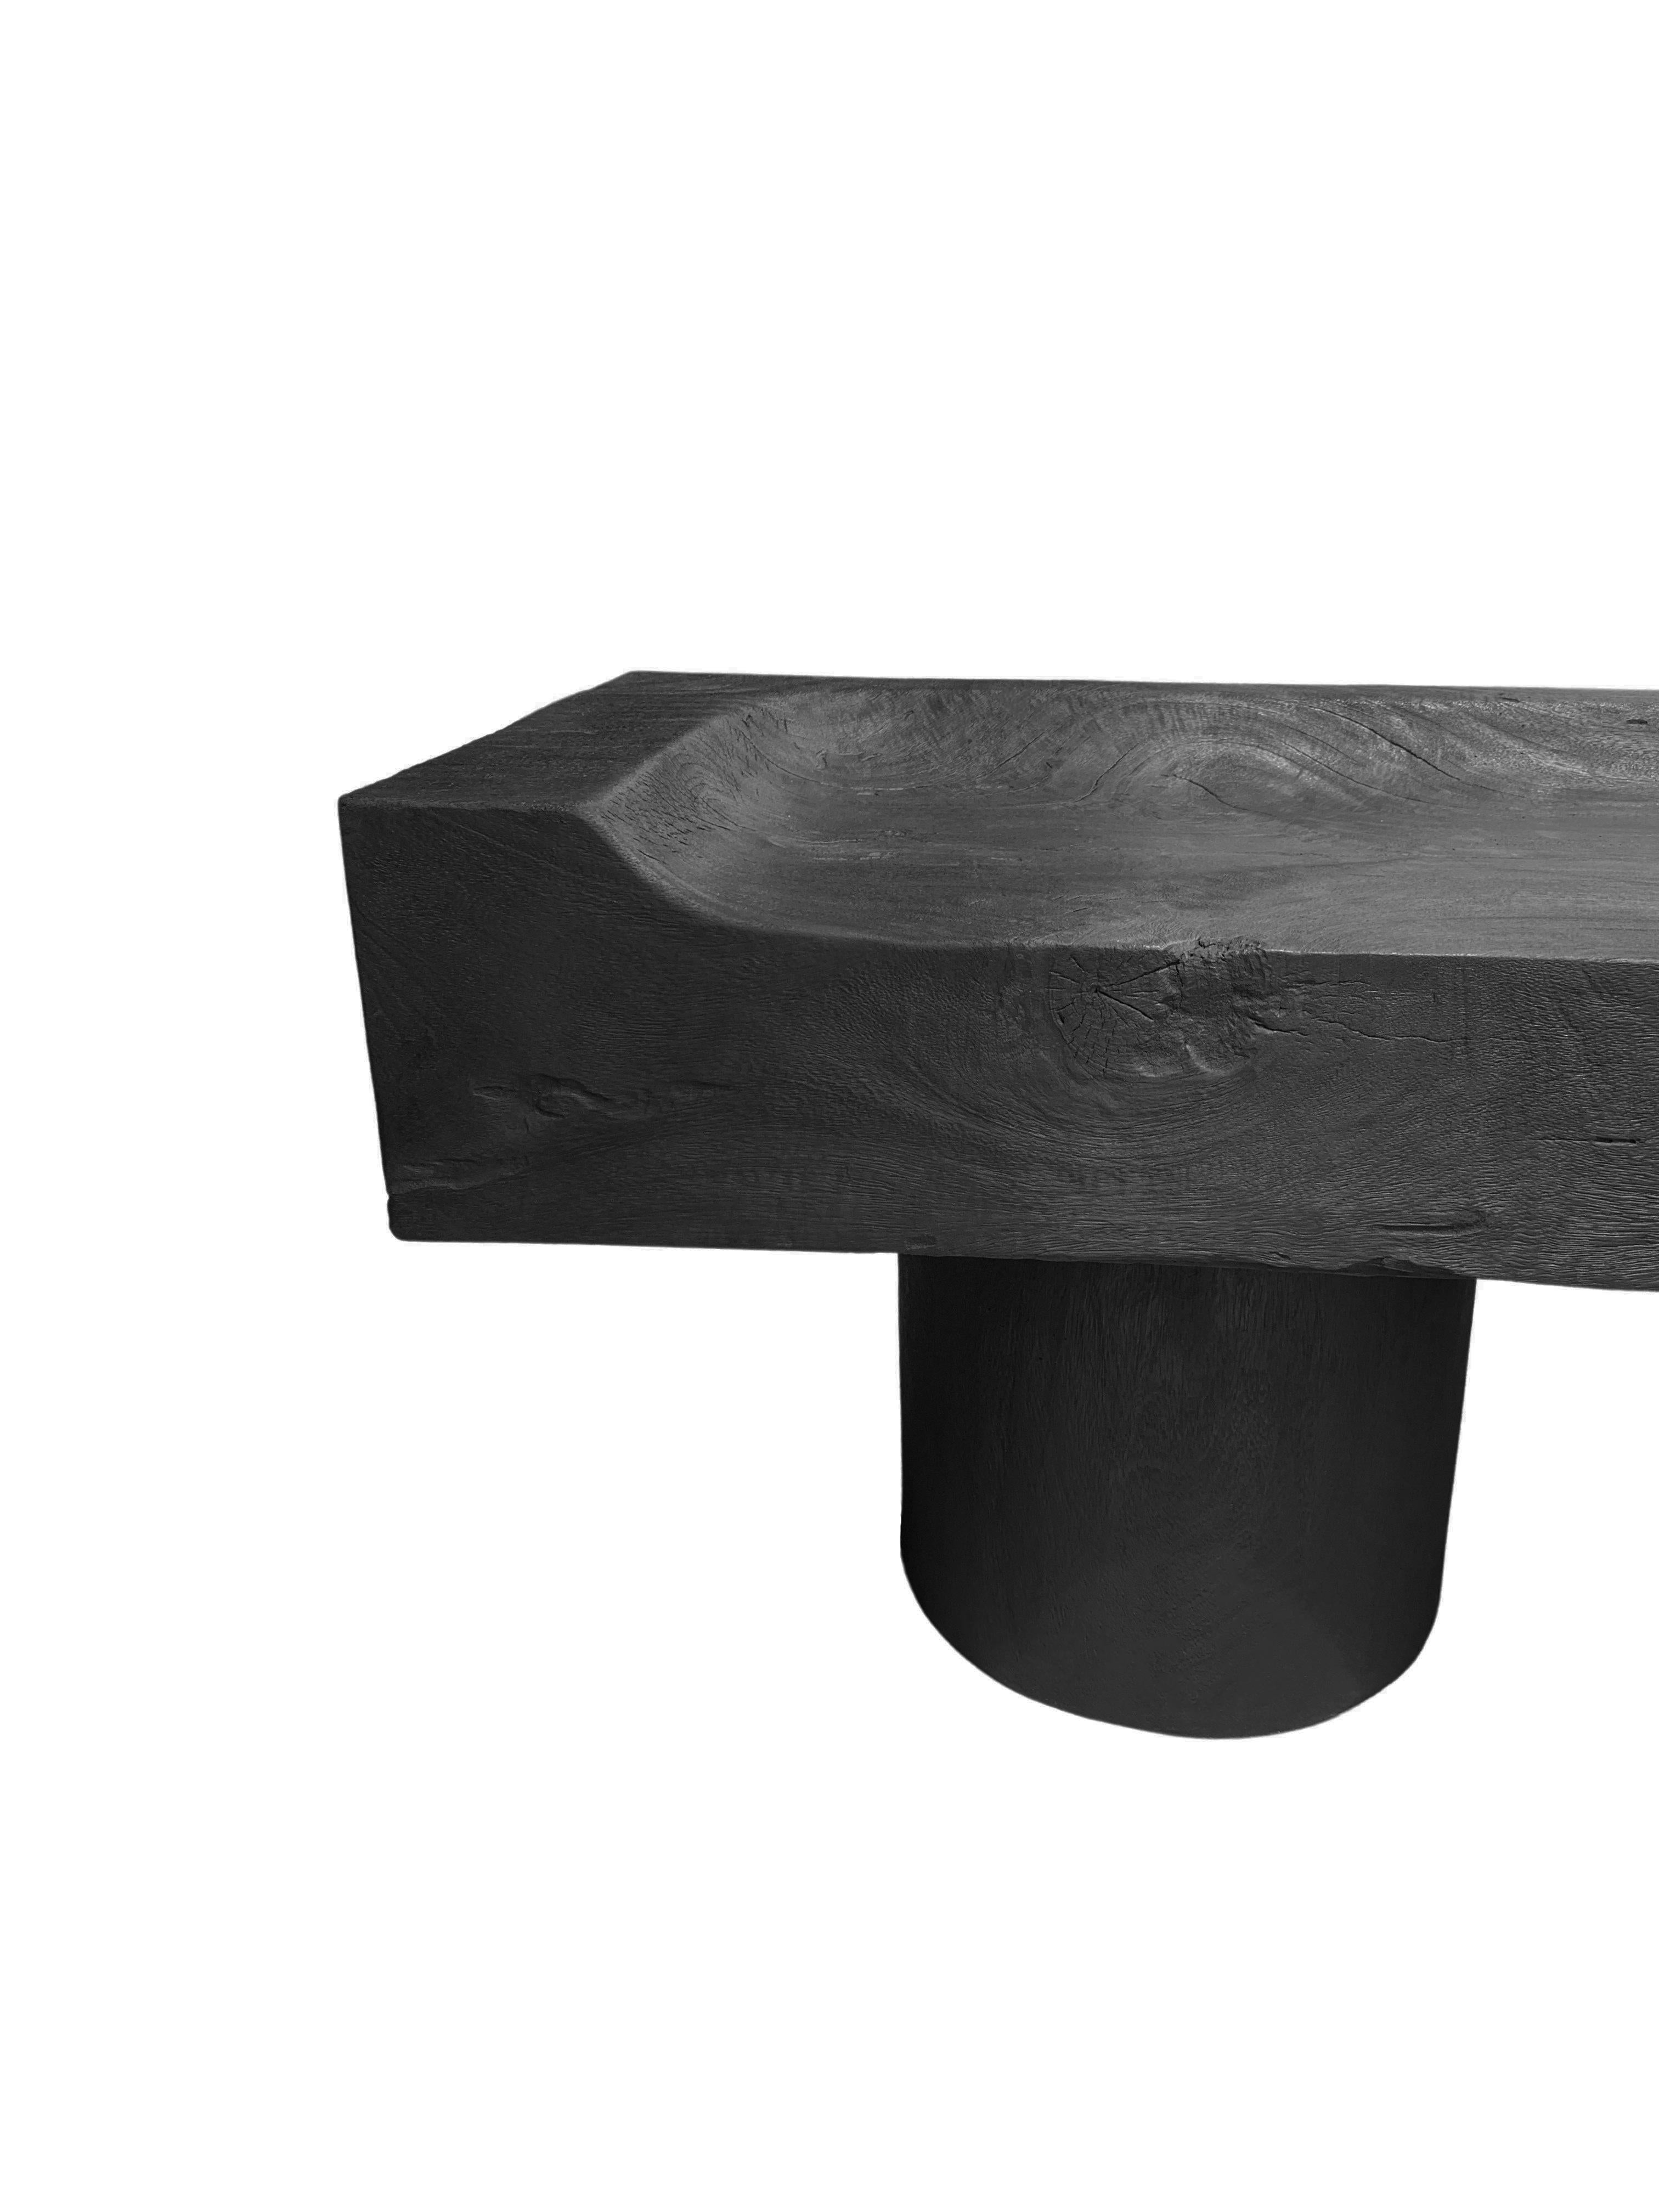 Other Sculptural Solid Mango Wood Bench Modern Organic, Burnt Finish For Sale